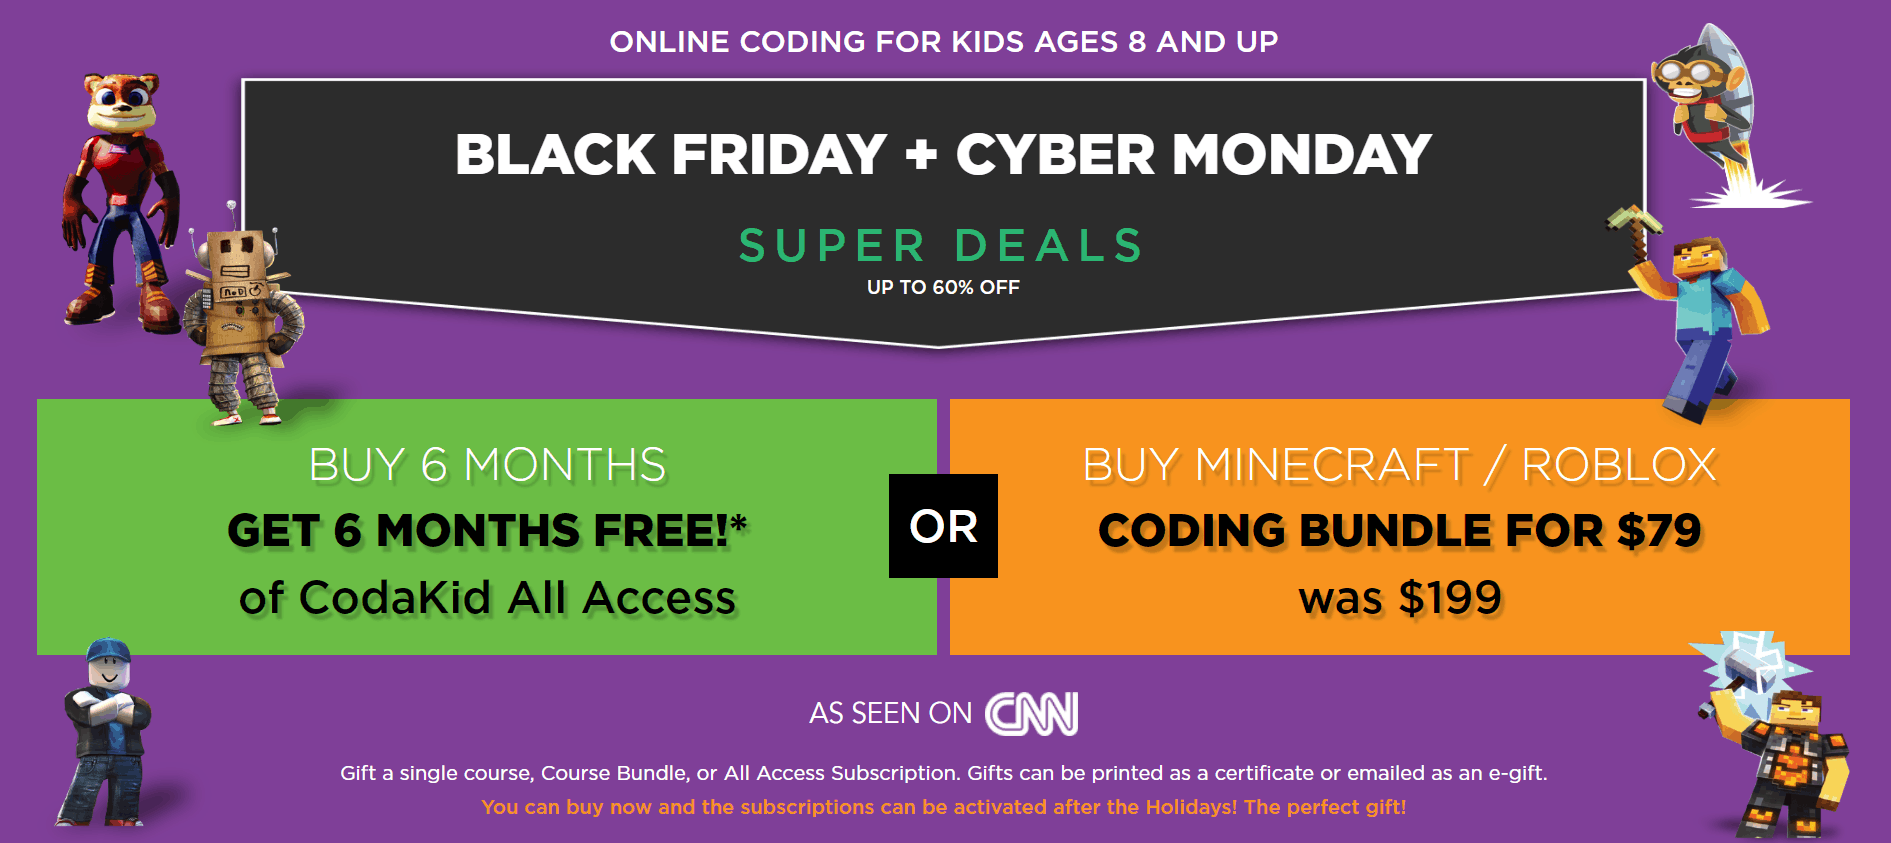 Codakid Cyber Monday 2019 Coupon Free 6 Months More Hello